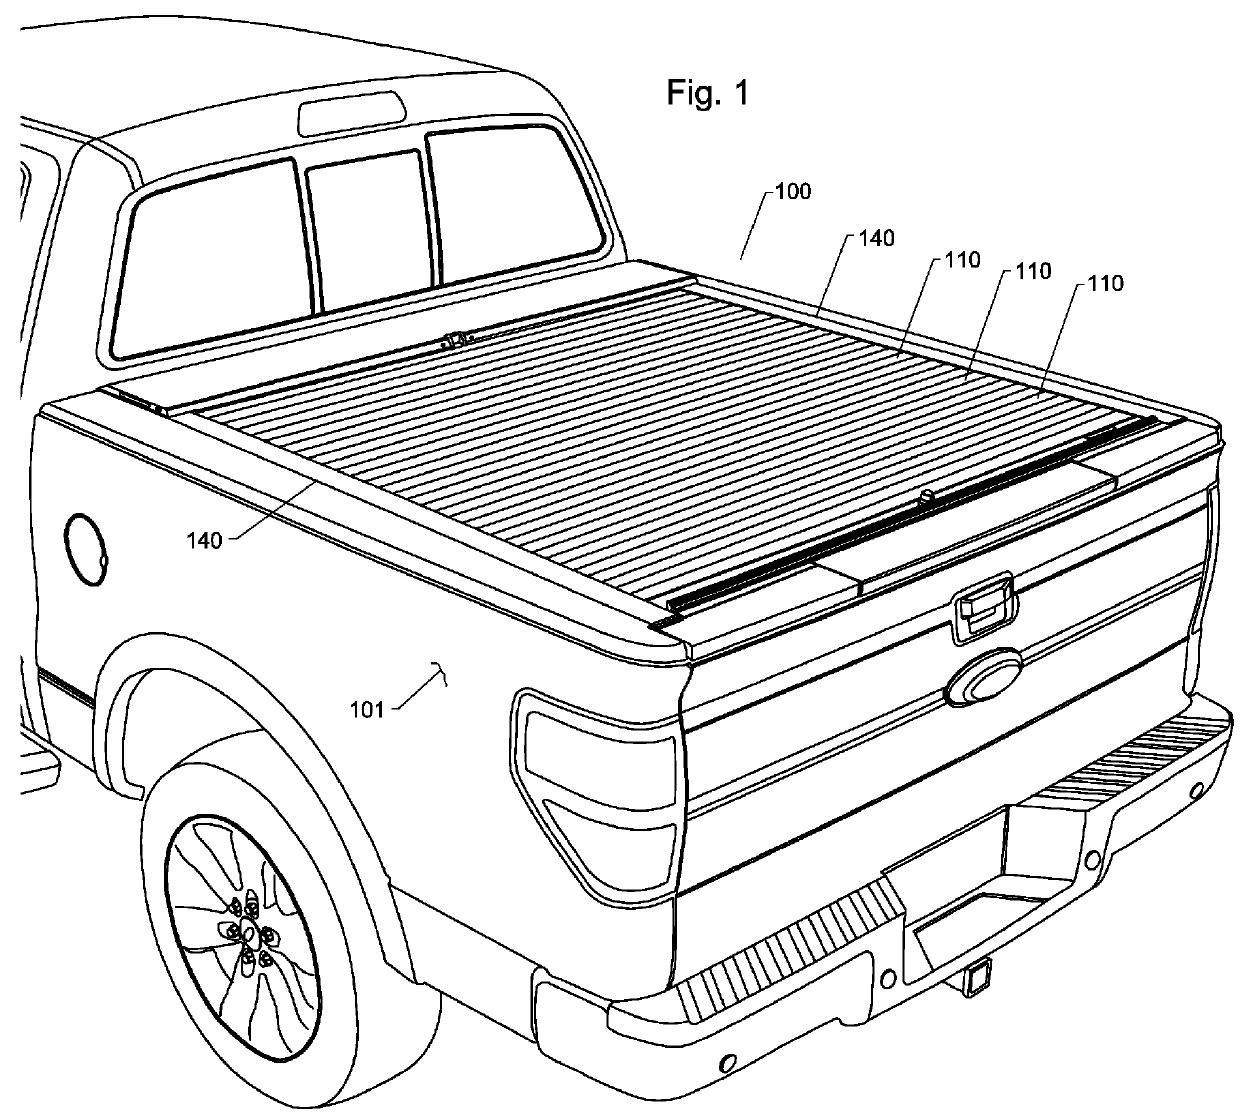 Retractable truck bed cover having slat array with flexible joiner members and shielded seams